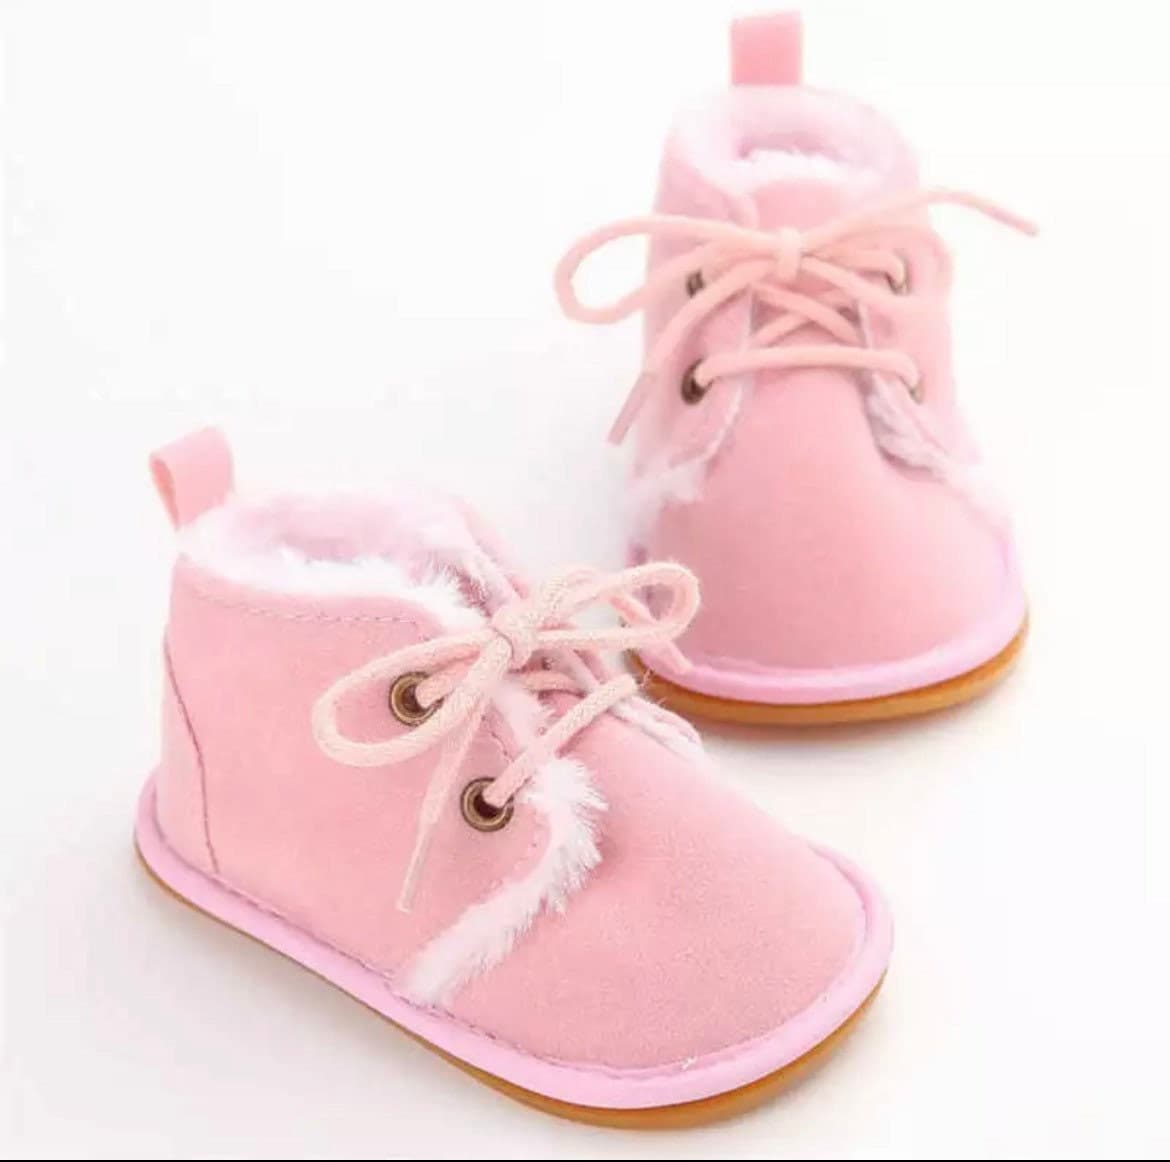 Suede Baby Boots with Fur-Welcome! Thanks for looking in our shop and viewing these beautiful handcrafted baby shoes.Our high quality first walker shoes are durable, breathable &amp; super cu-Bijou Bubs